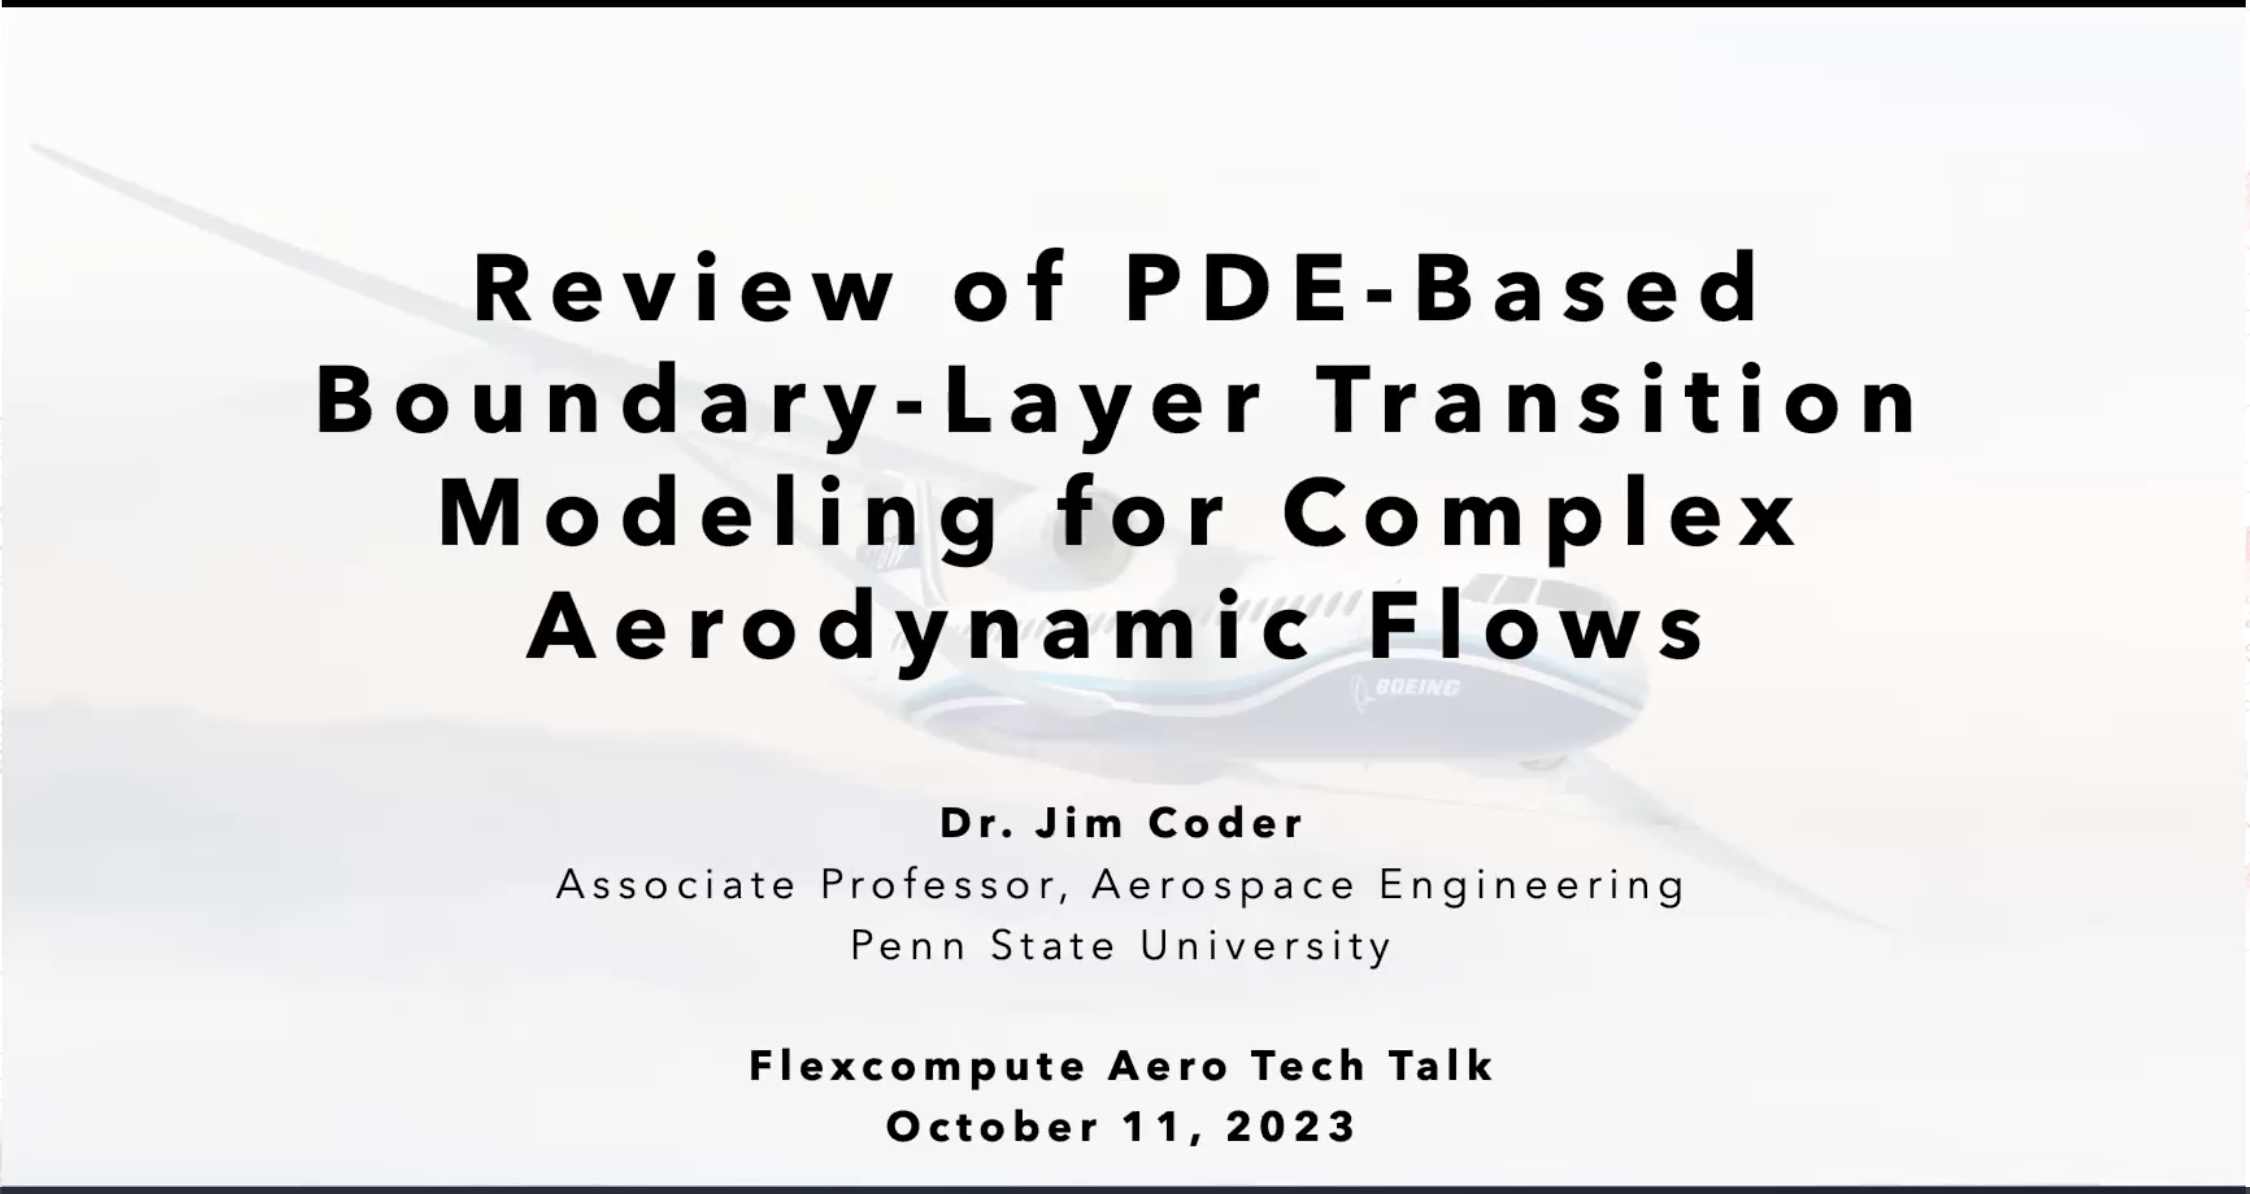 Aero Tech Talks Seminar on Oct 11: Review of PDE-Based Boundary-Layer Transition Modeling for Complex Aerodynamic Flows